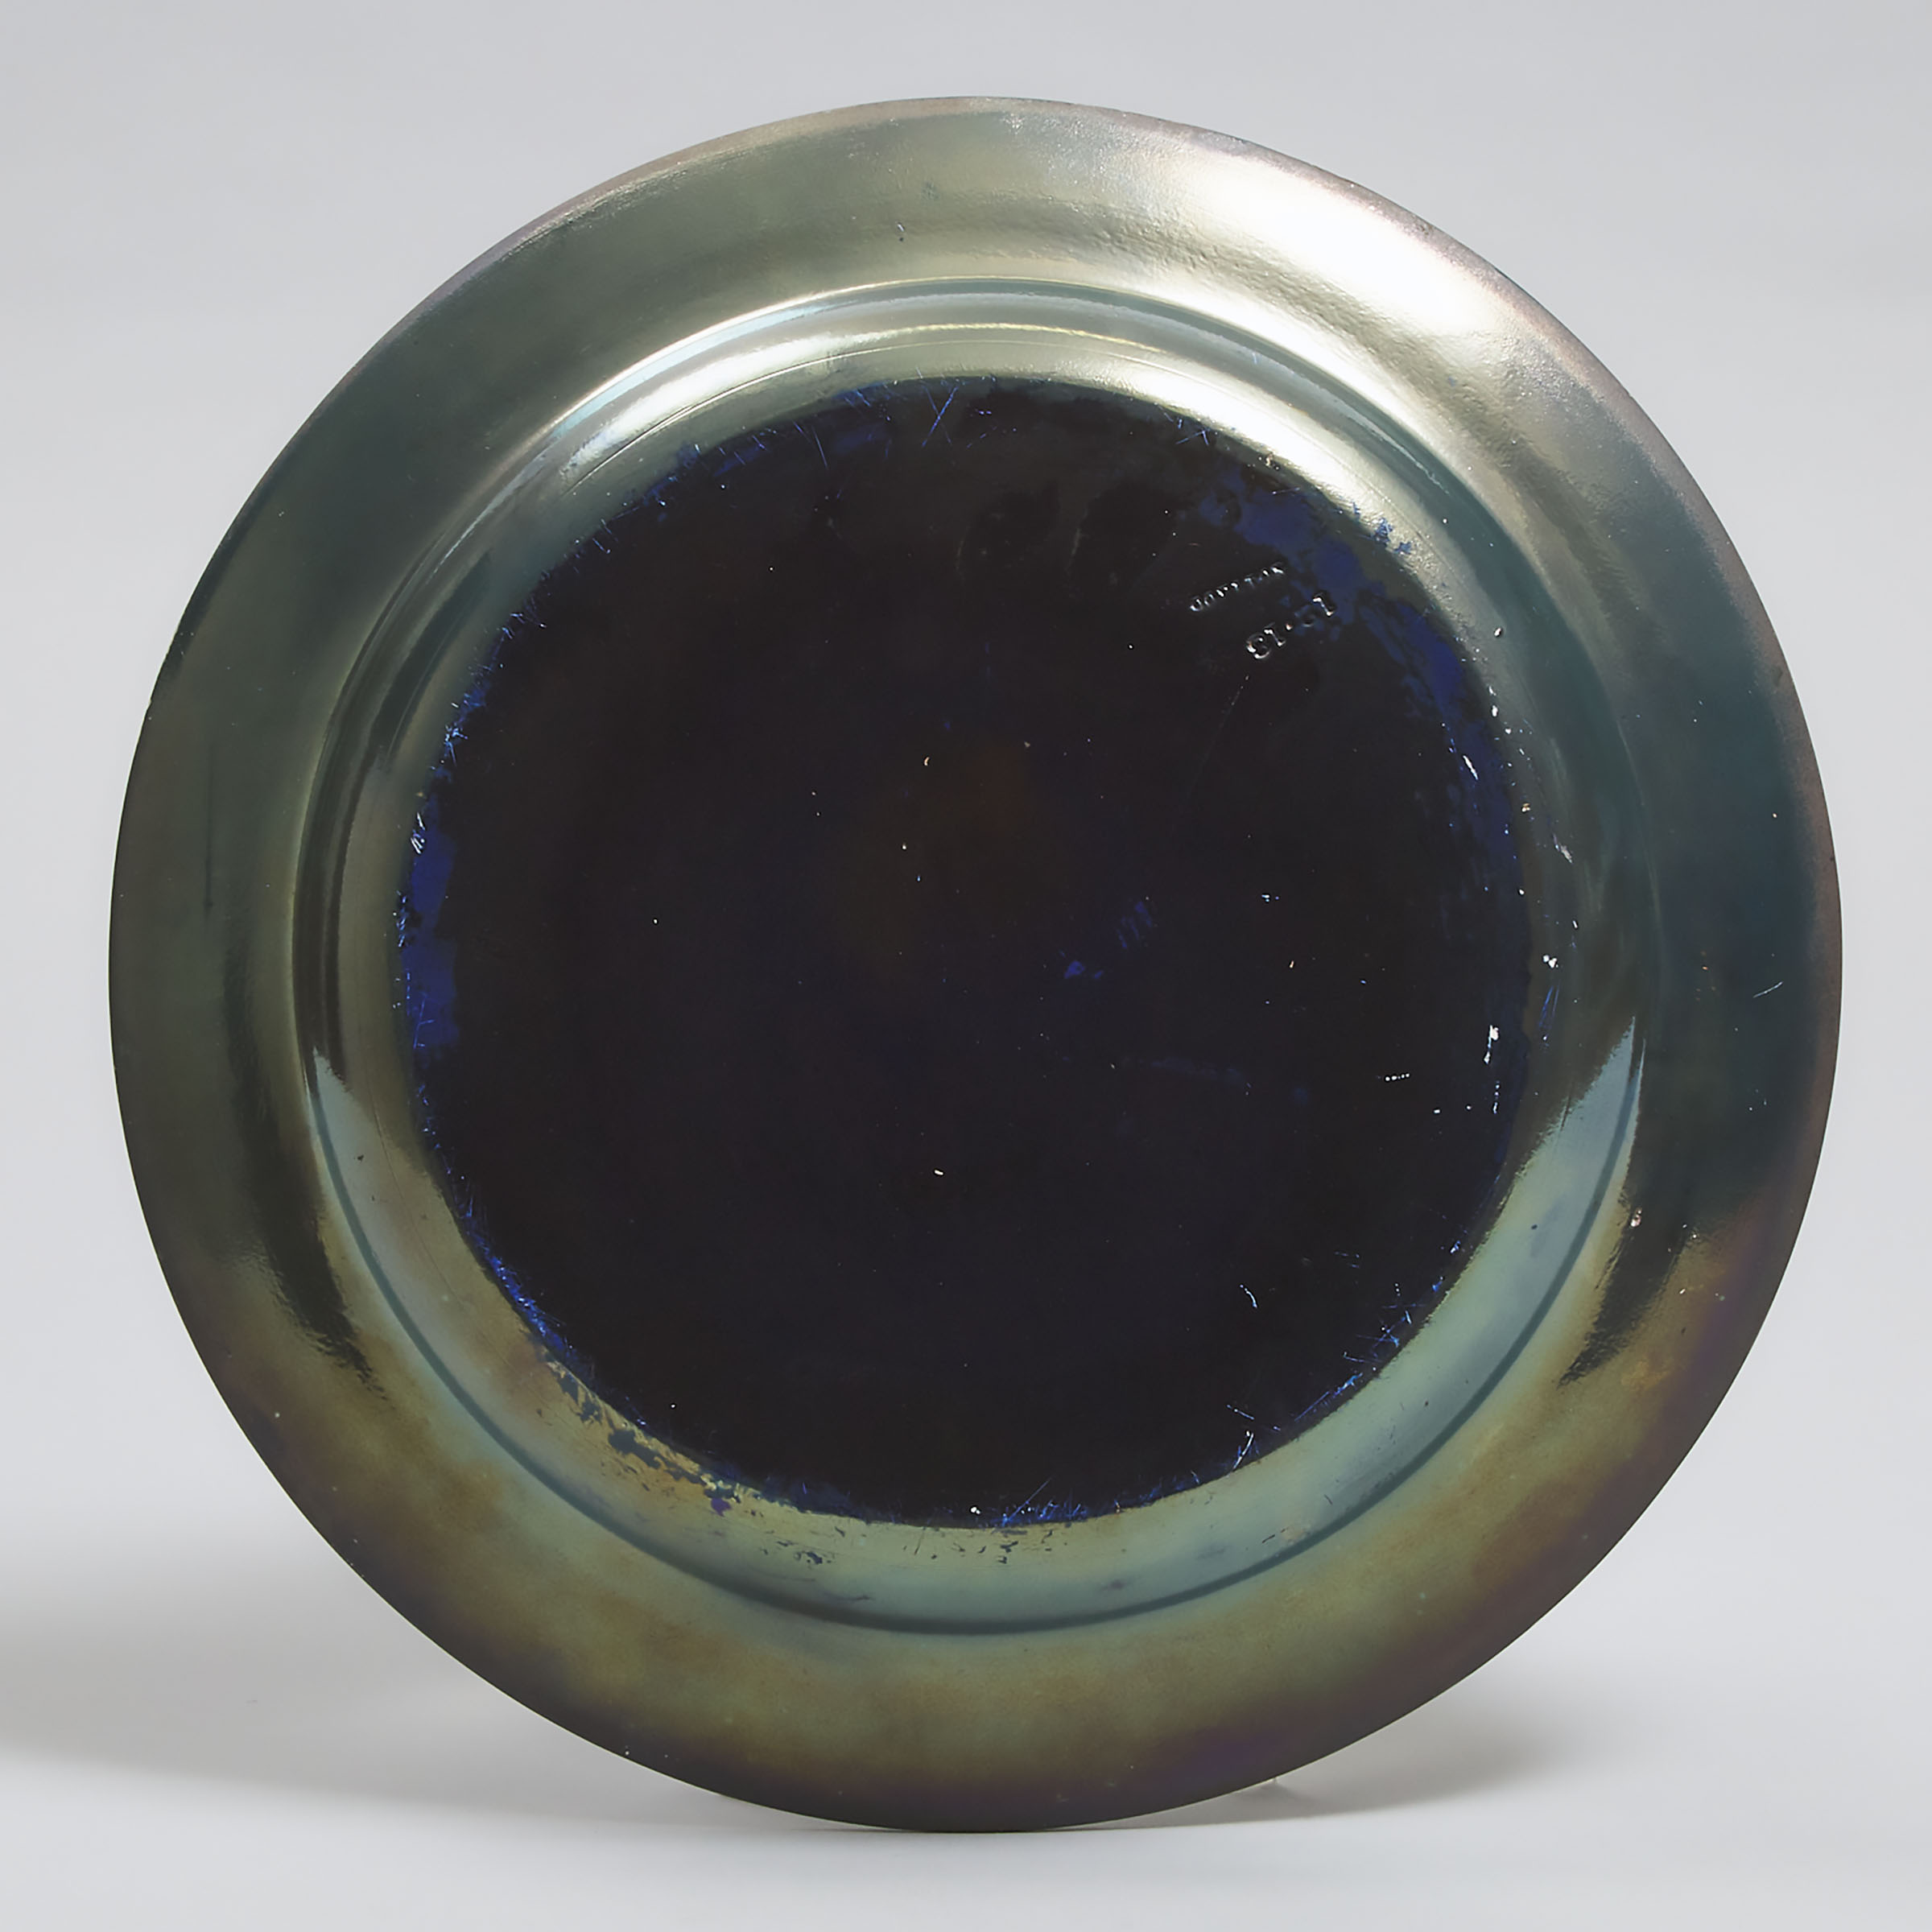 Royal Doulton Blue and Silver Lustre Decorated Plate, c.1918